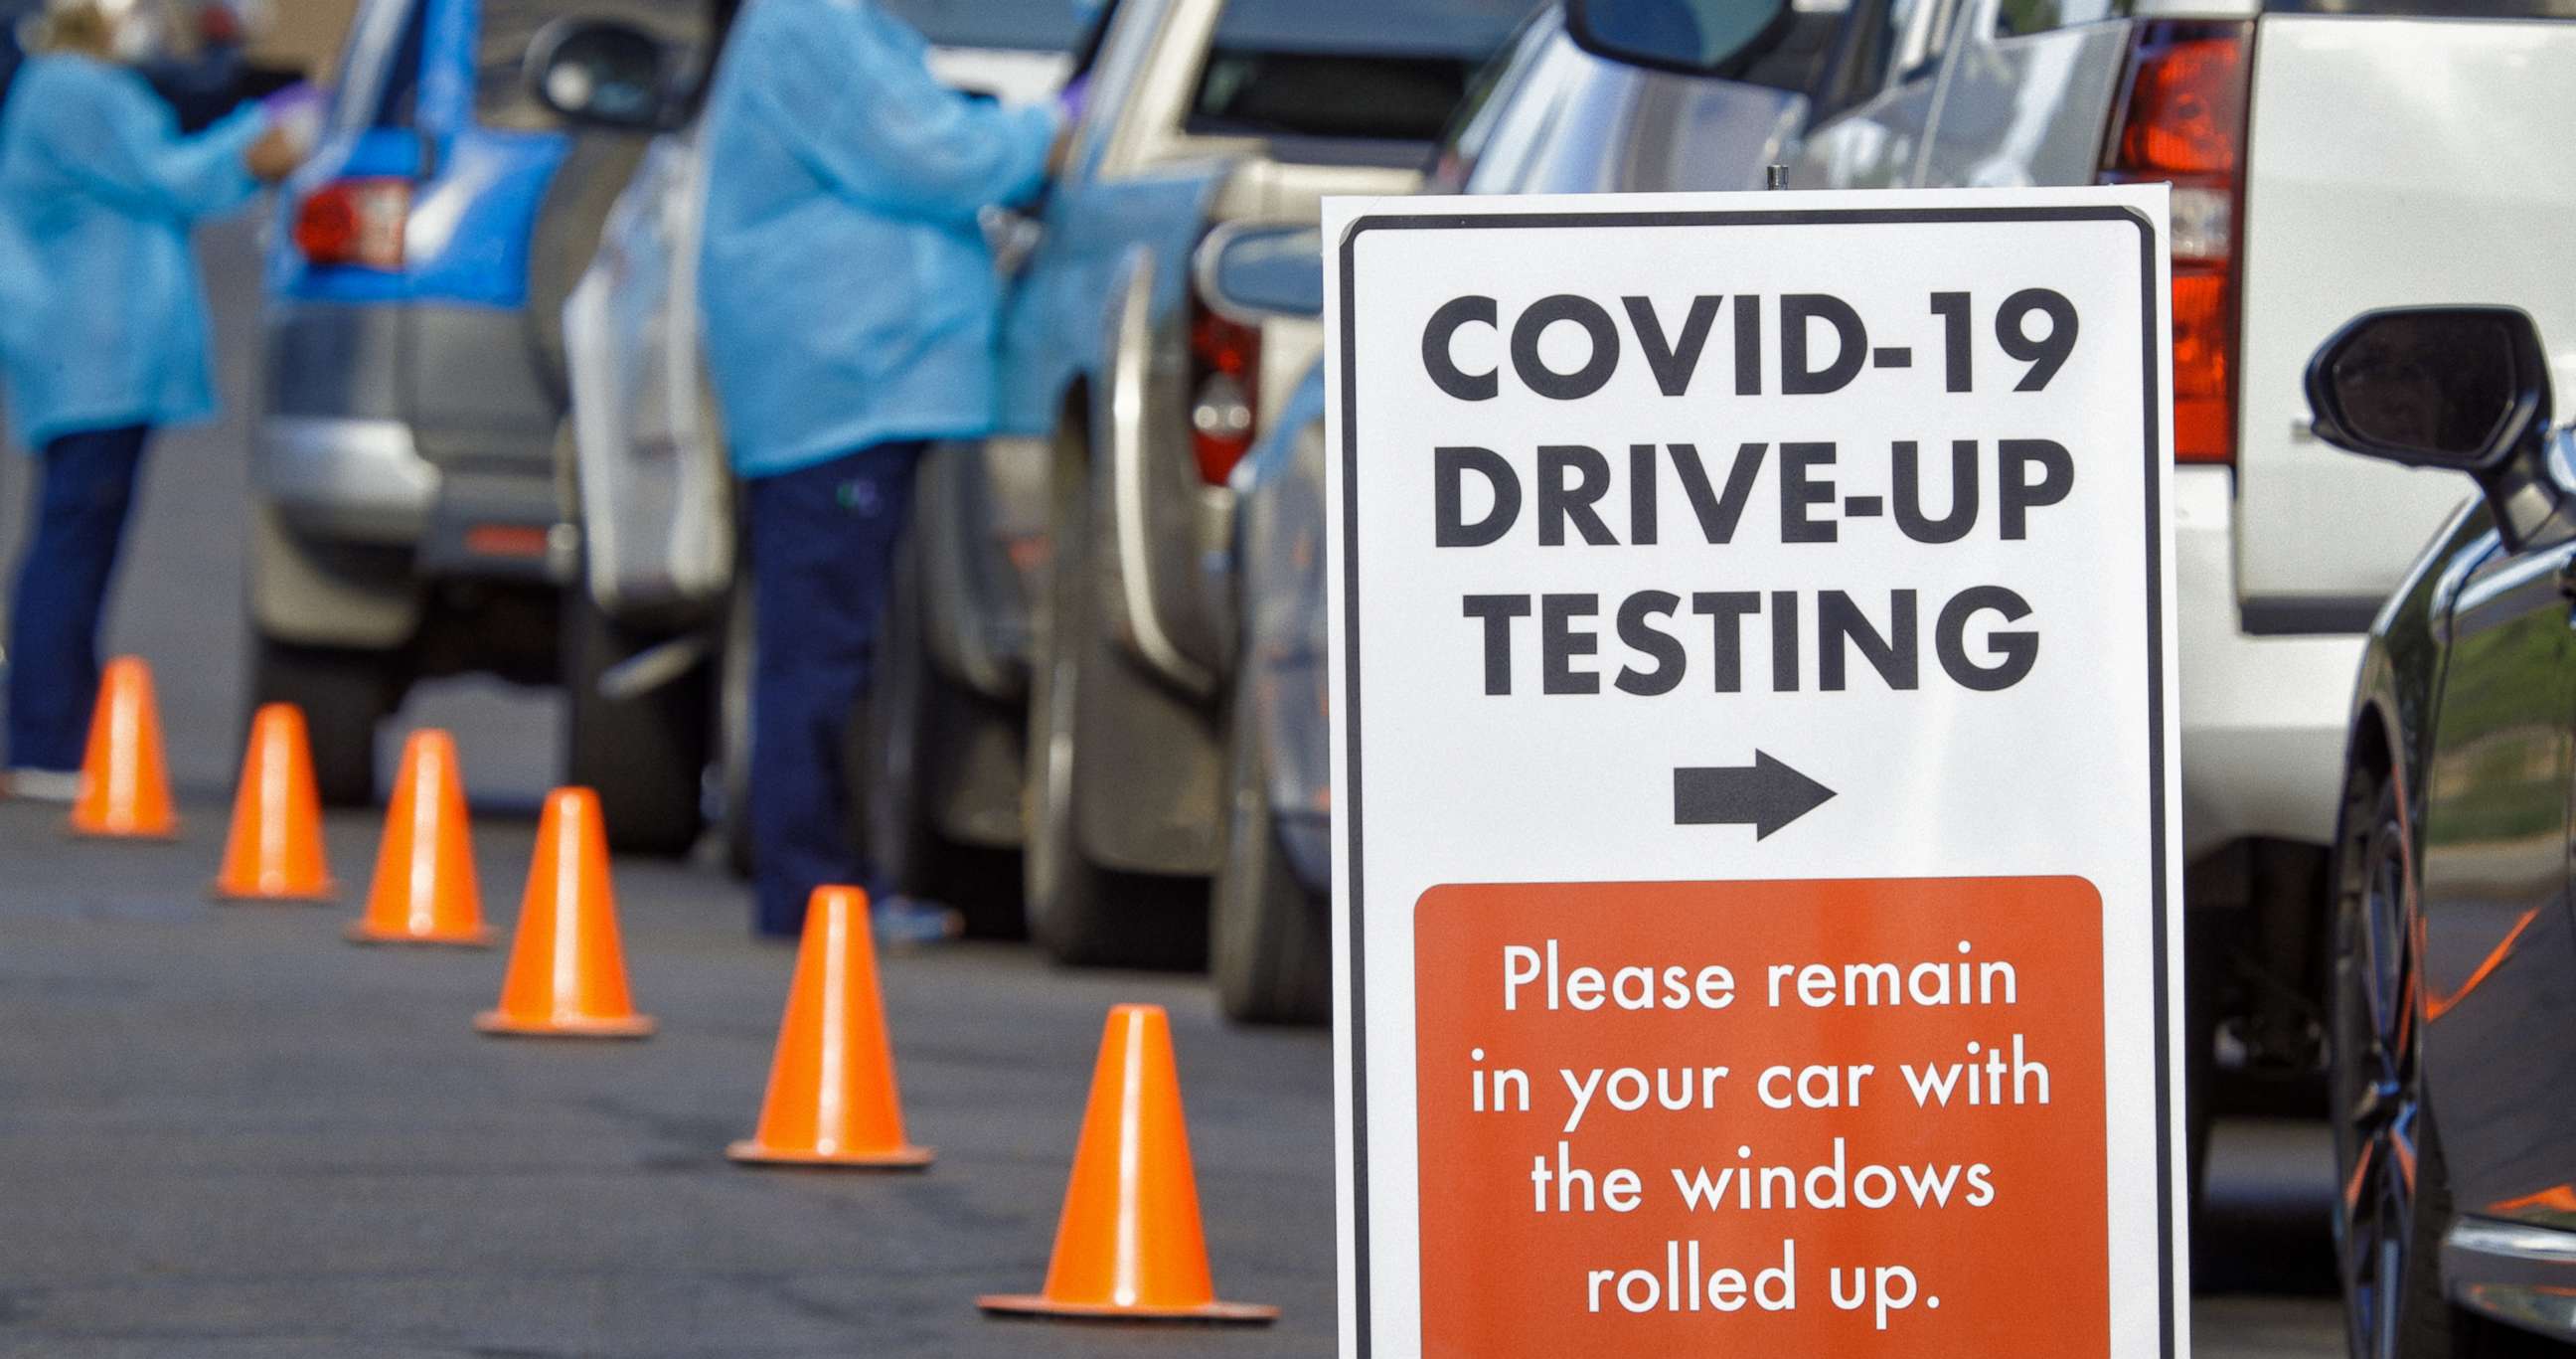 PHOTO: A "COVID-19 Drive-Up Testing" Sign.